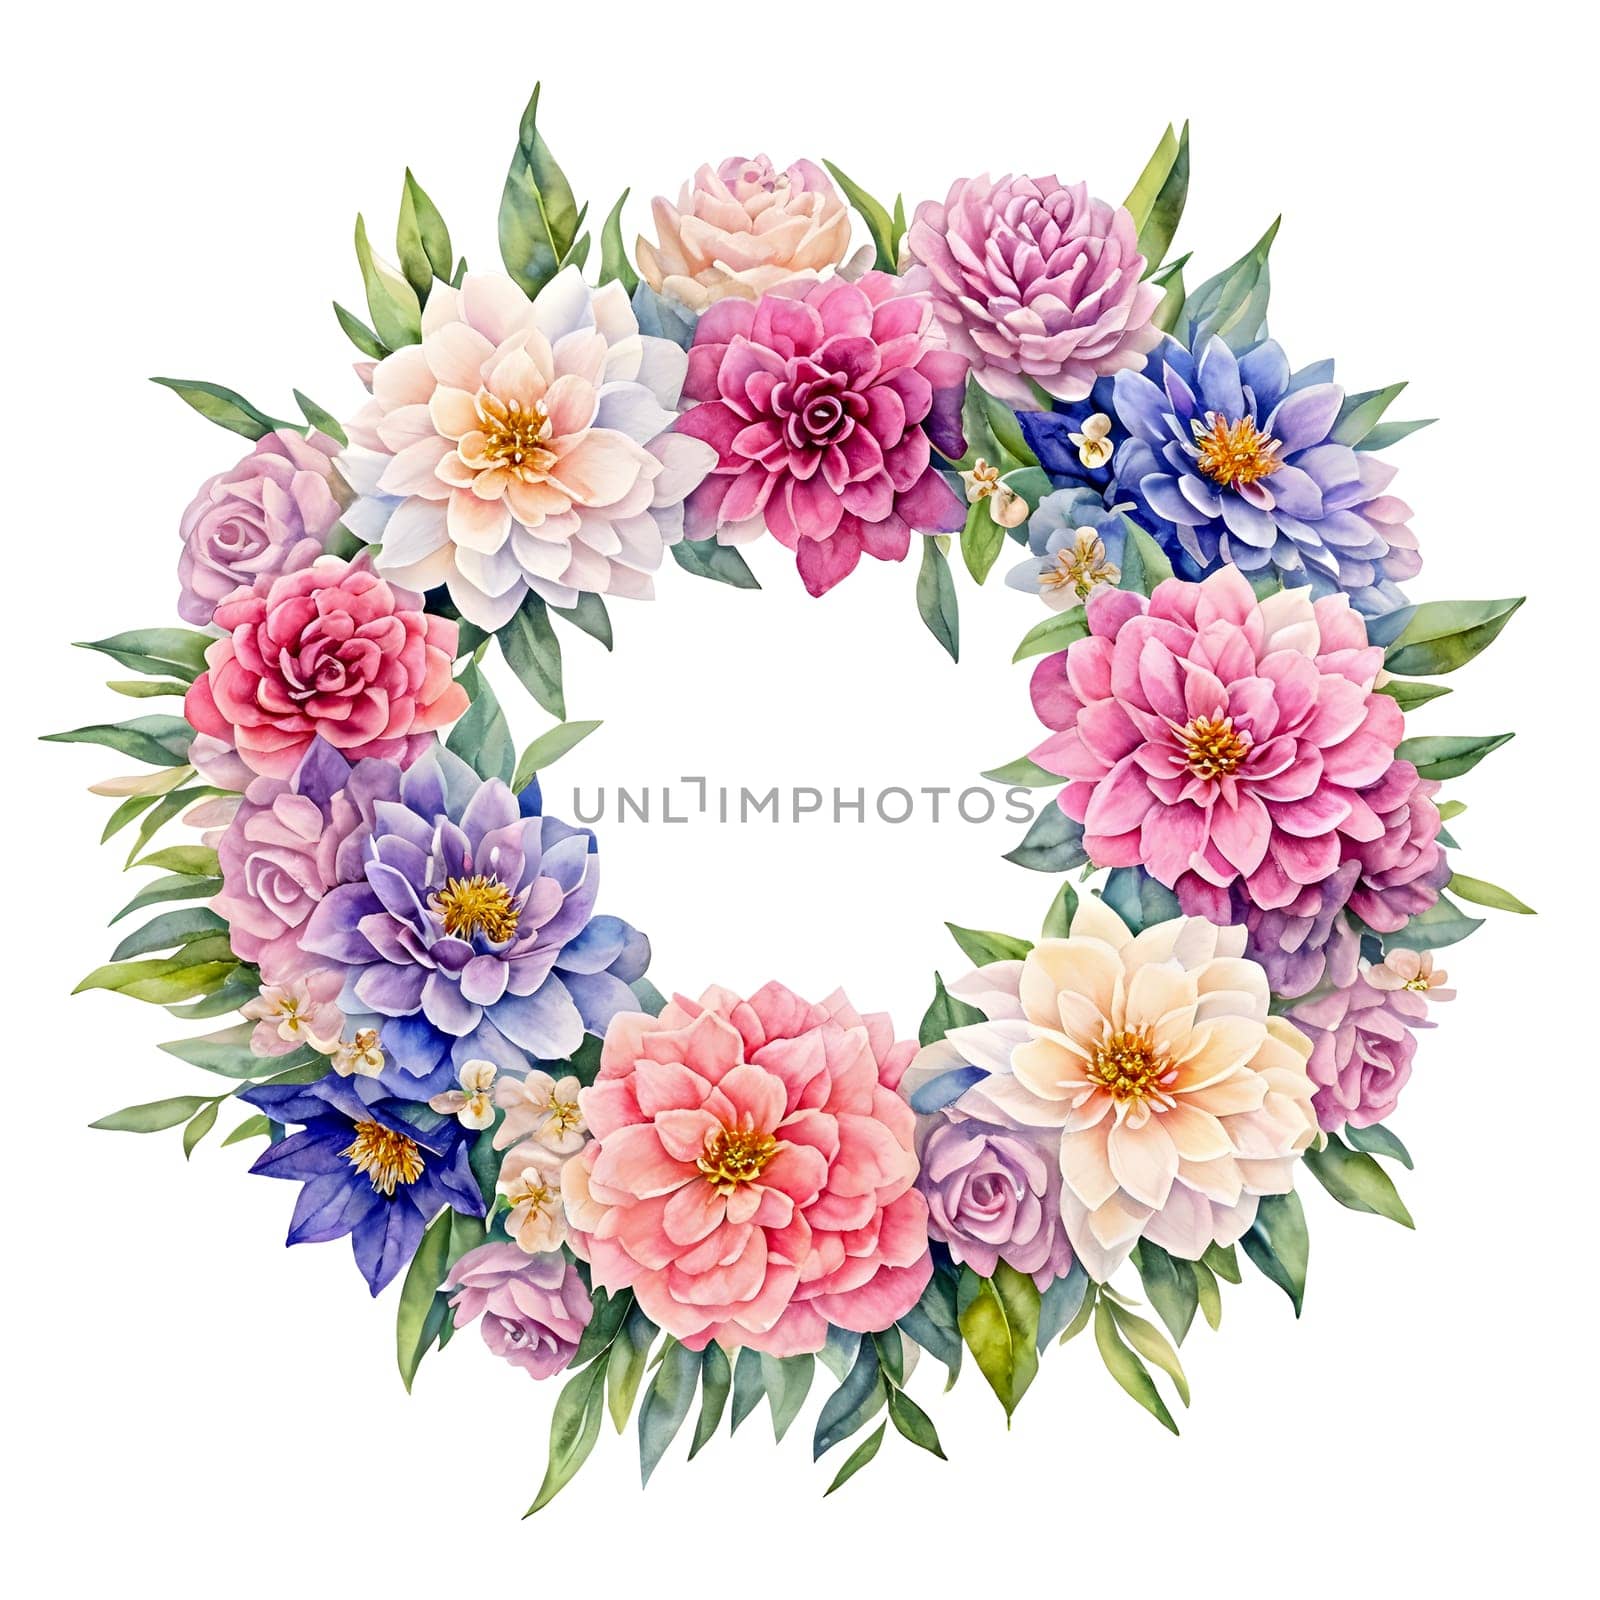 Watercolor Floral Wreath with Pink, White, Blue Flowers and Leaves on White Background. by LanaLeta